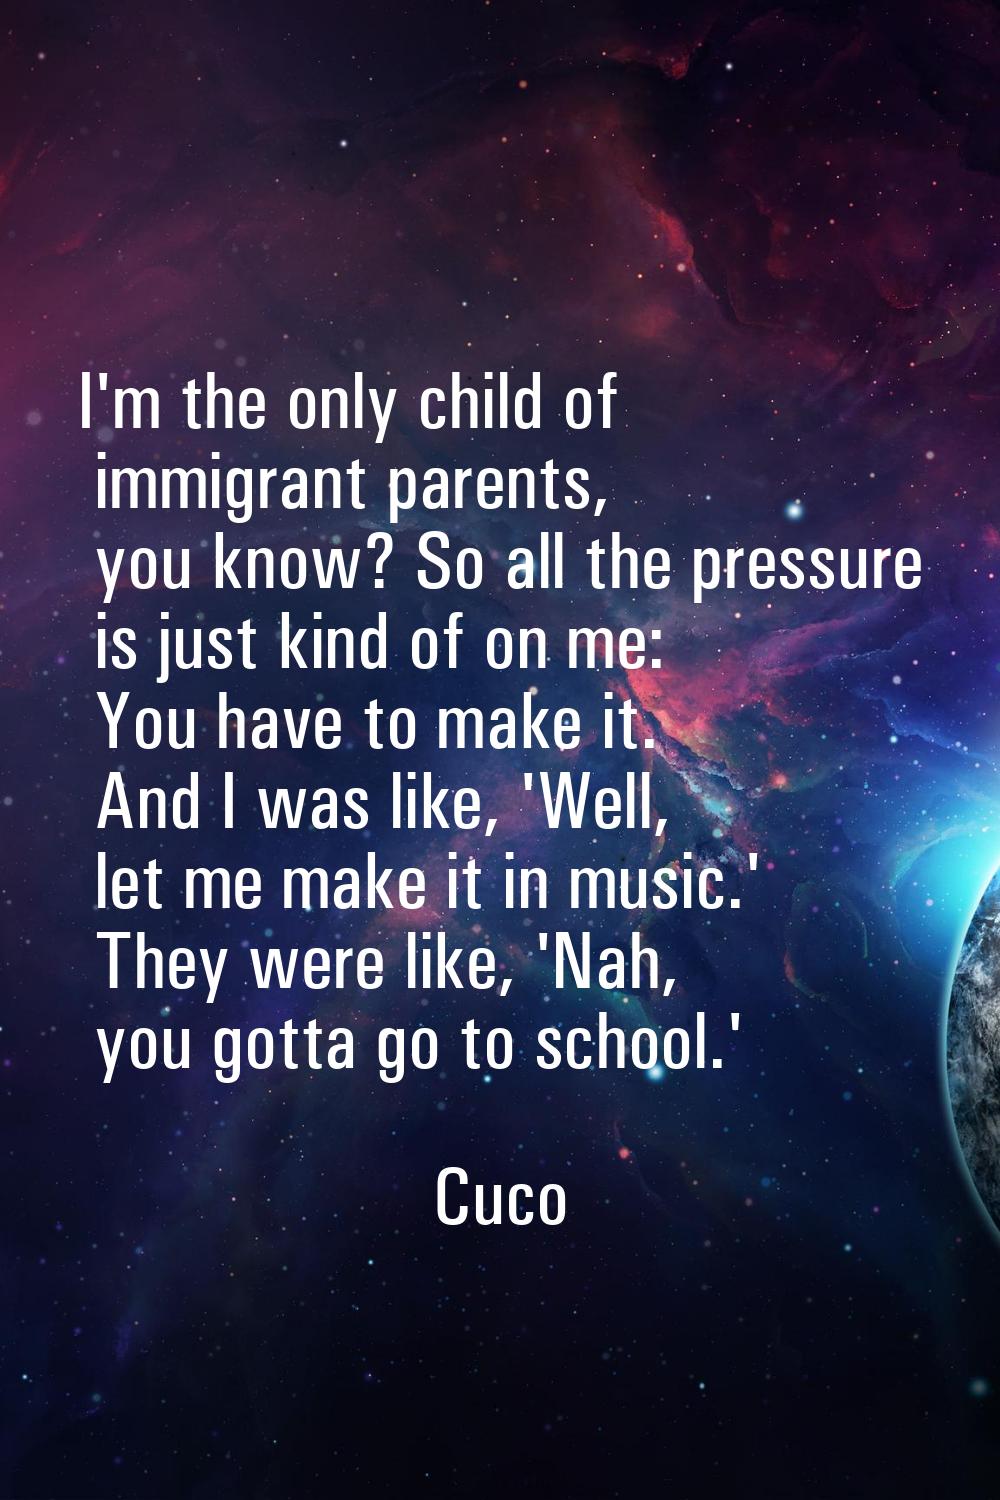 I'm the only child of immigrant parents, you know? So all the pressure is just kind of on me: You h